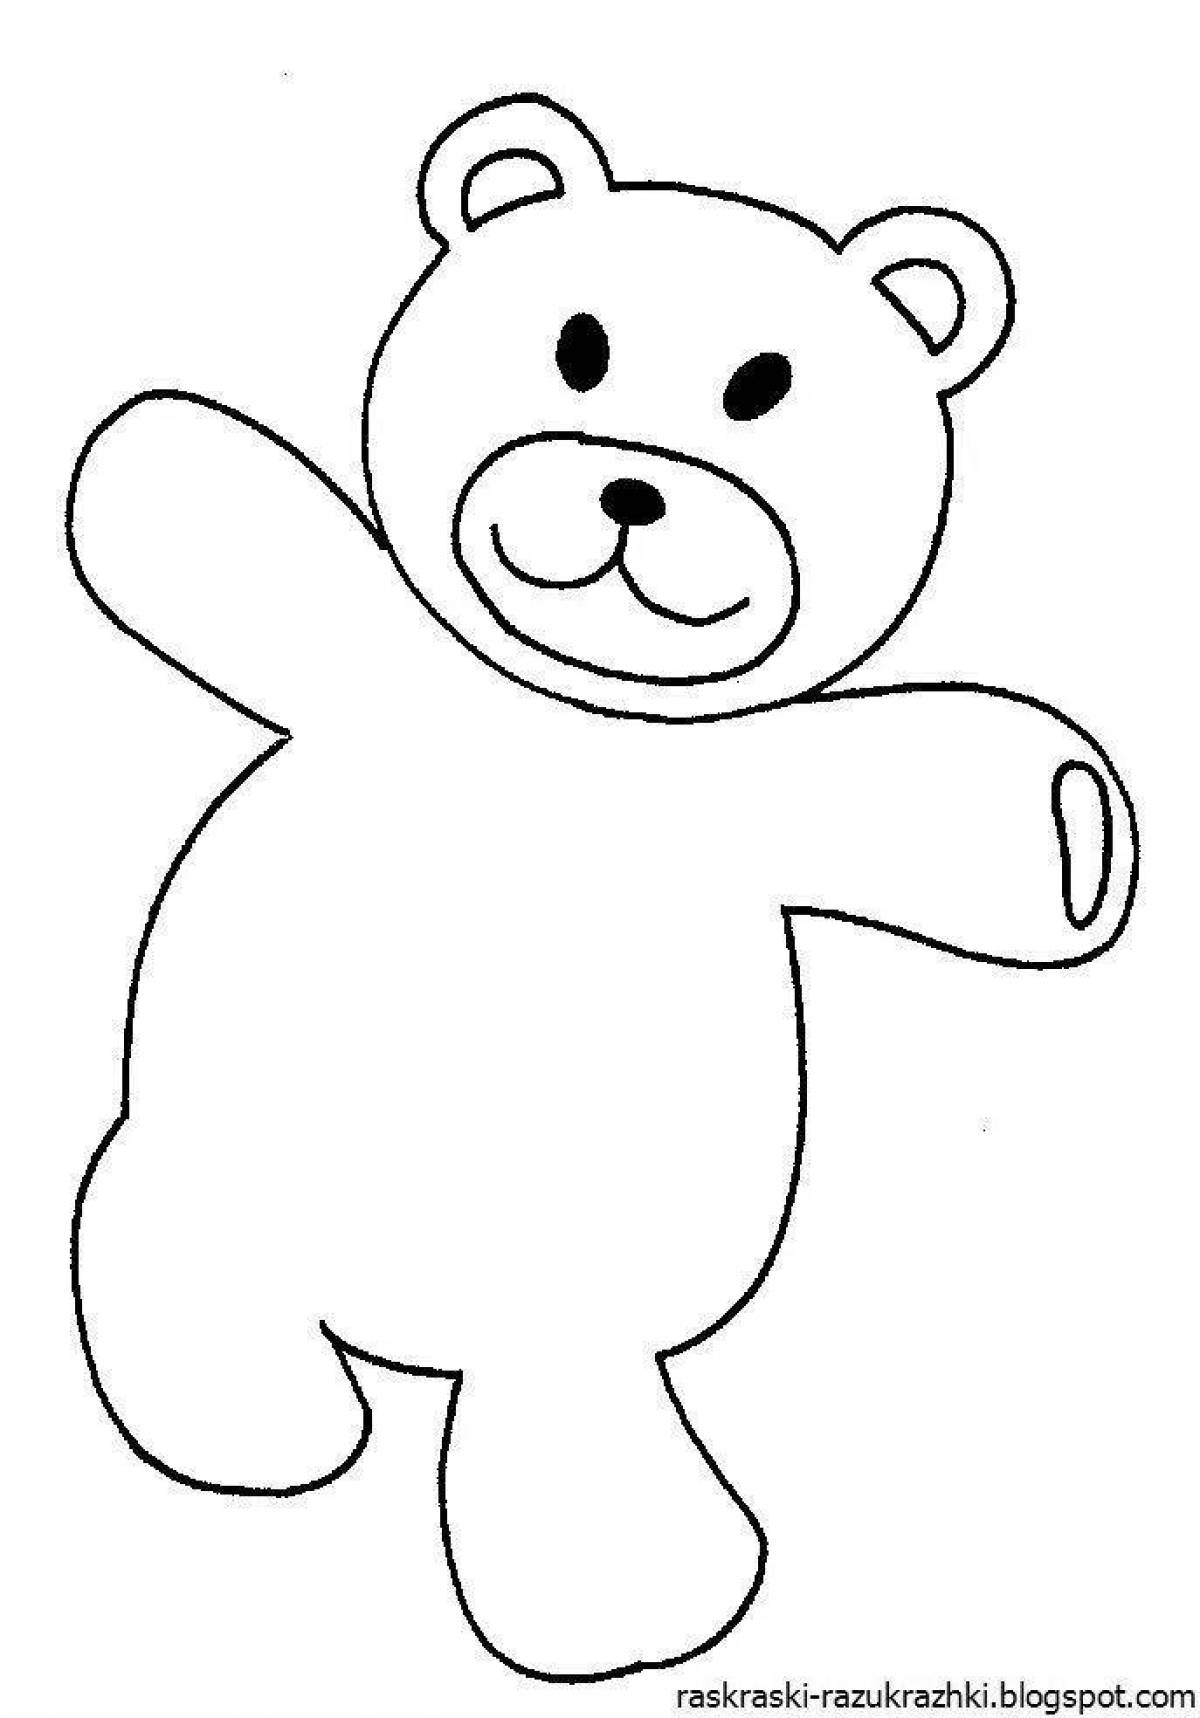 Fun bear coloring book for 2-3 year olds